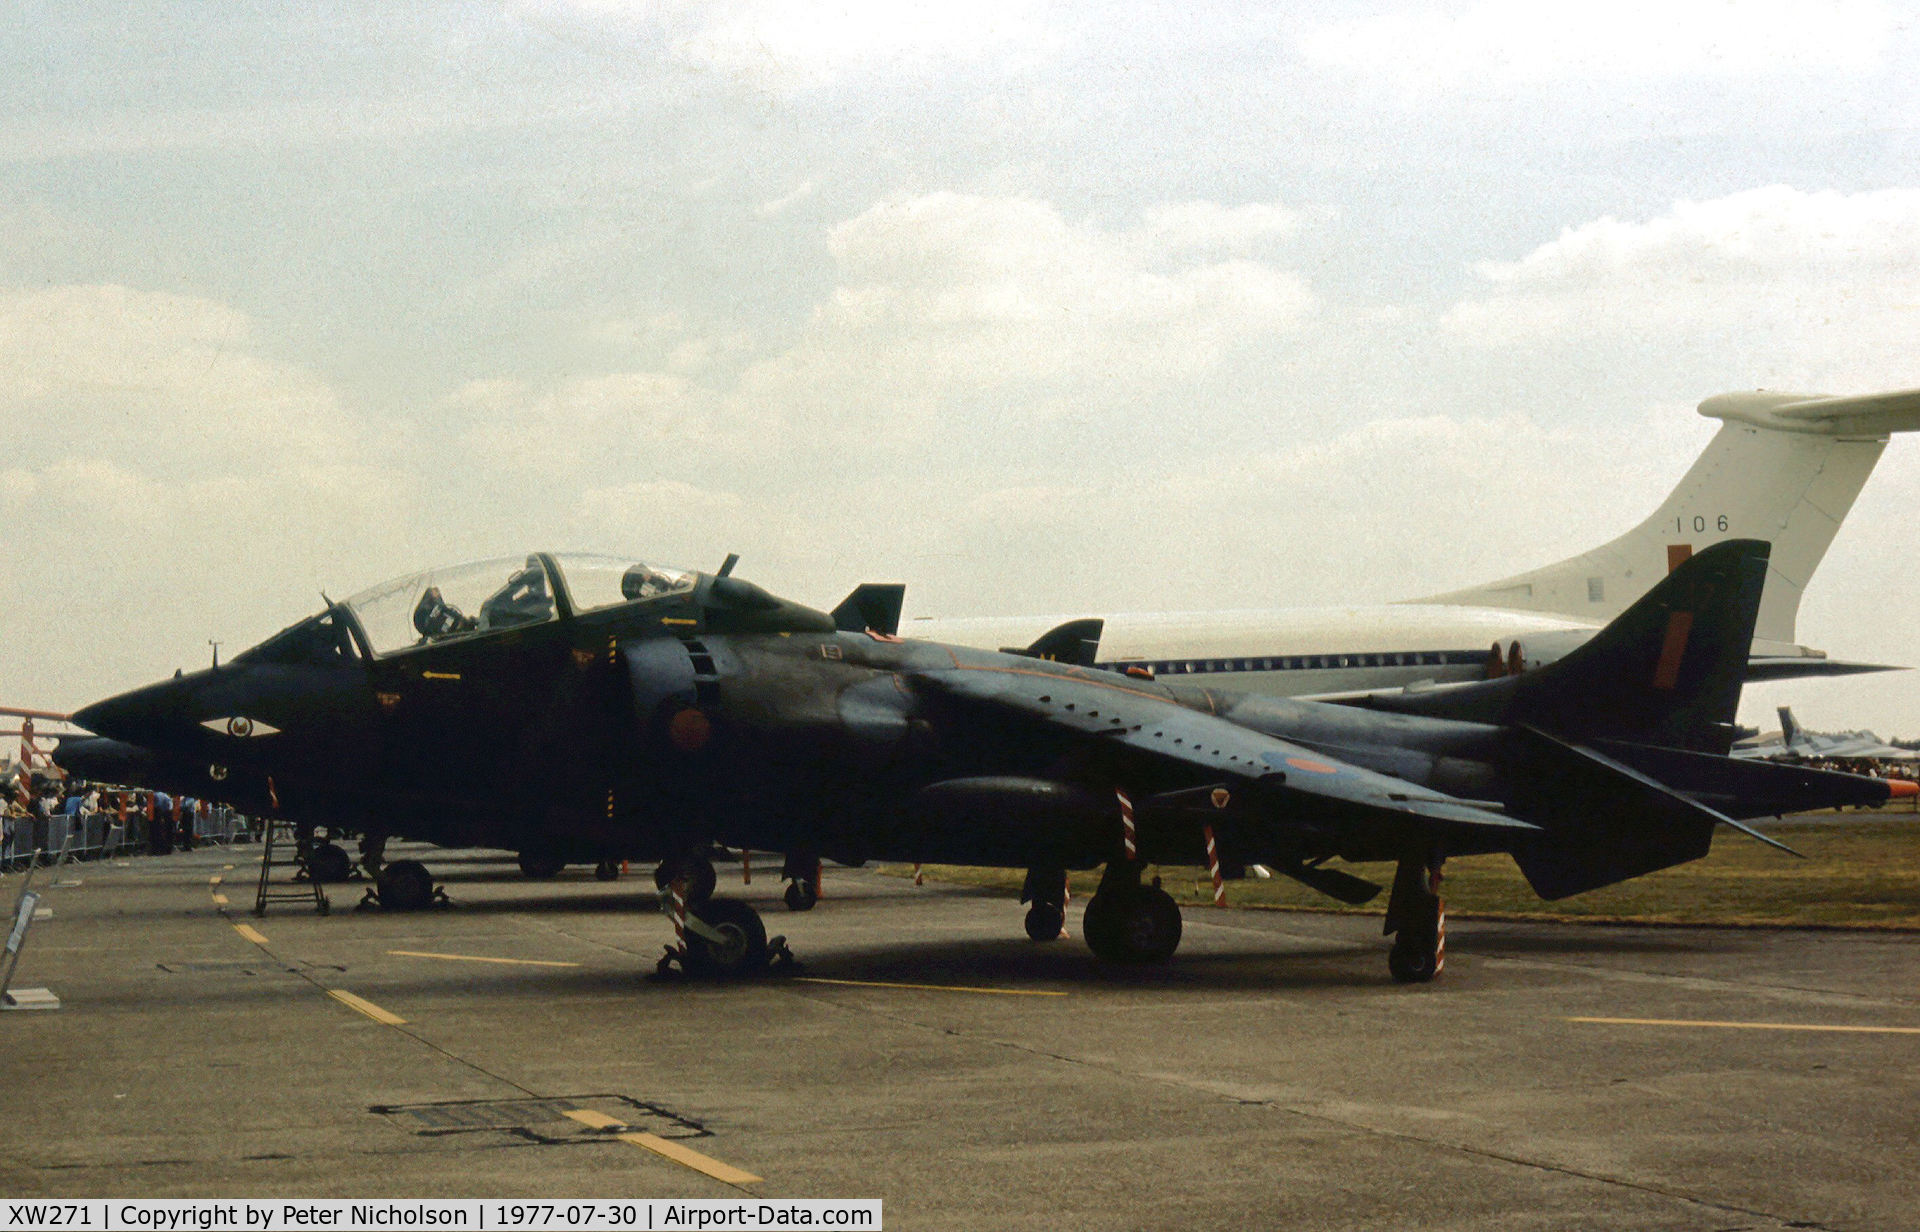 XW271, 1971 Hawker Siddeley Harrier T.4 C/N 212010, Harrier T.4 of 1 Squadron at RAF Wittering on display at the 1977 Royal Review held at RAF Finningley.